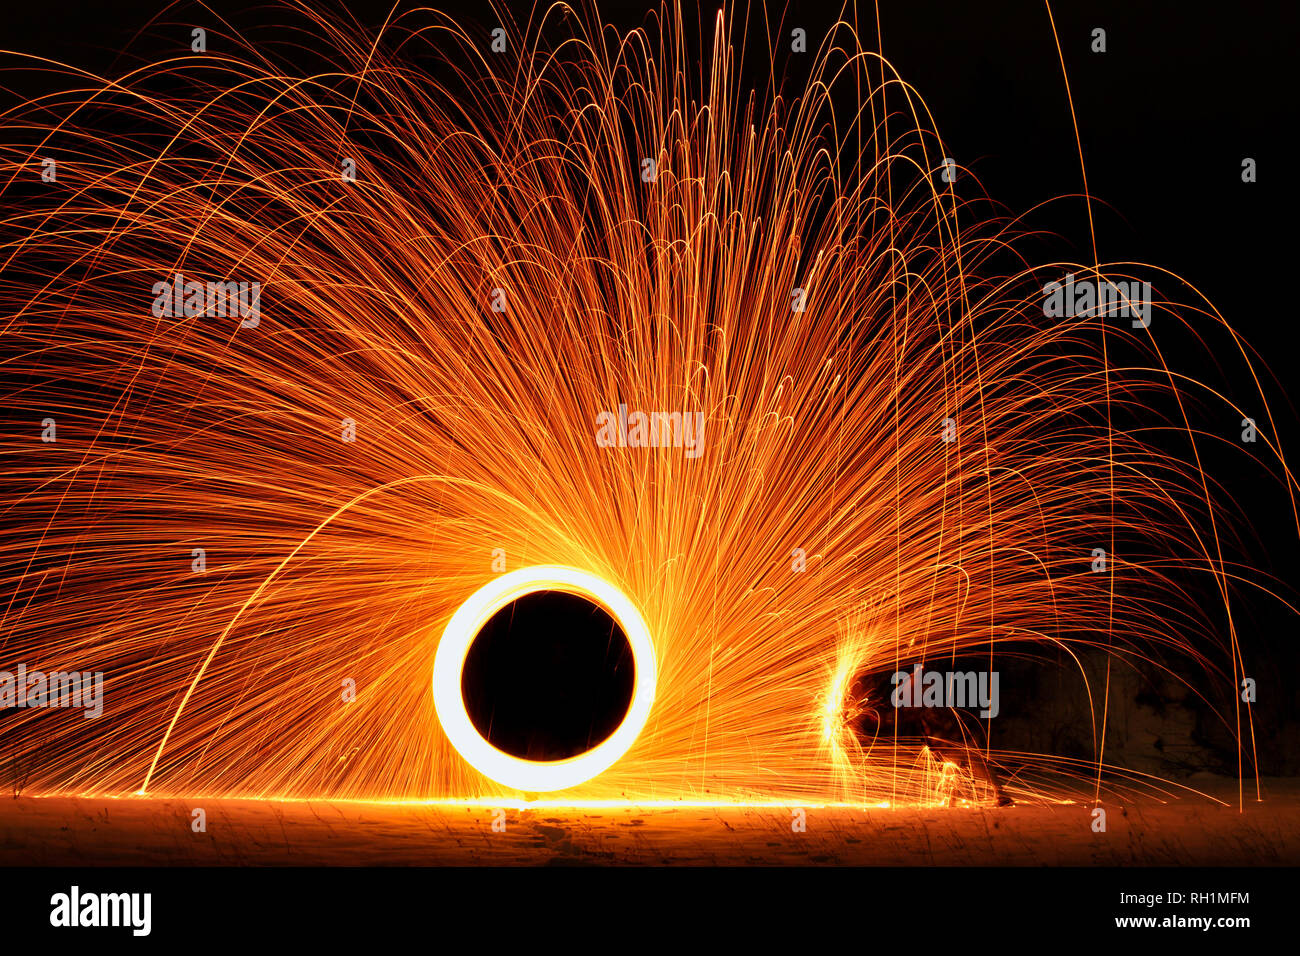 Steel wool photography with umbrella like a protection from burning steel Stock Photo